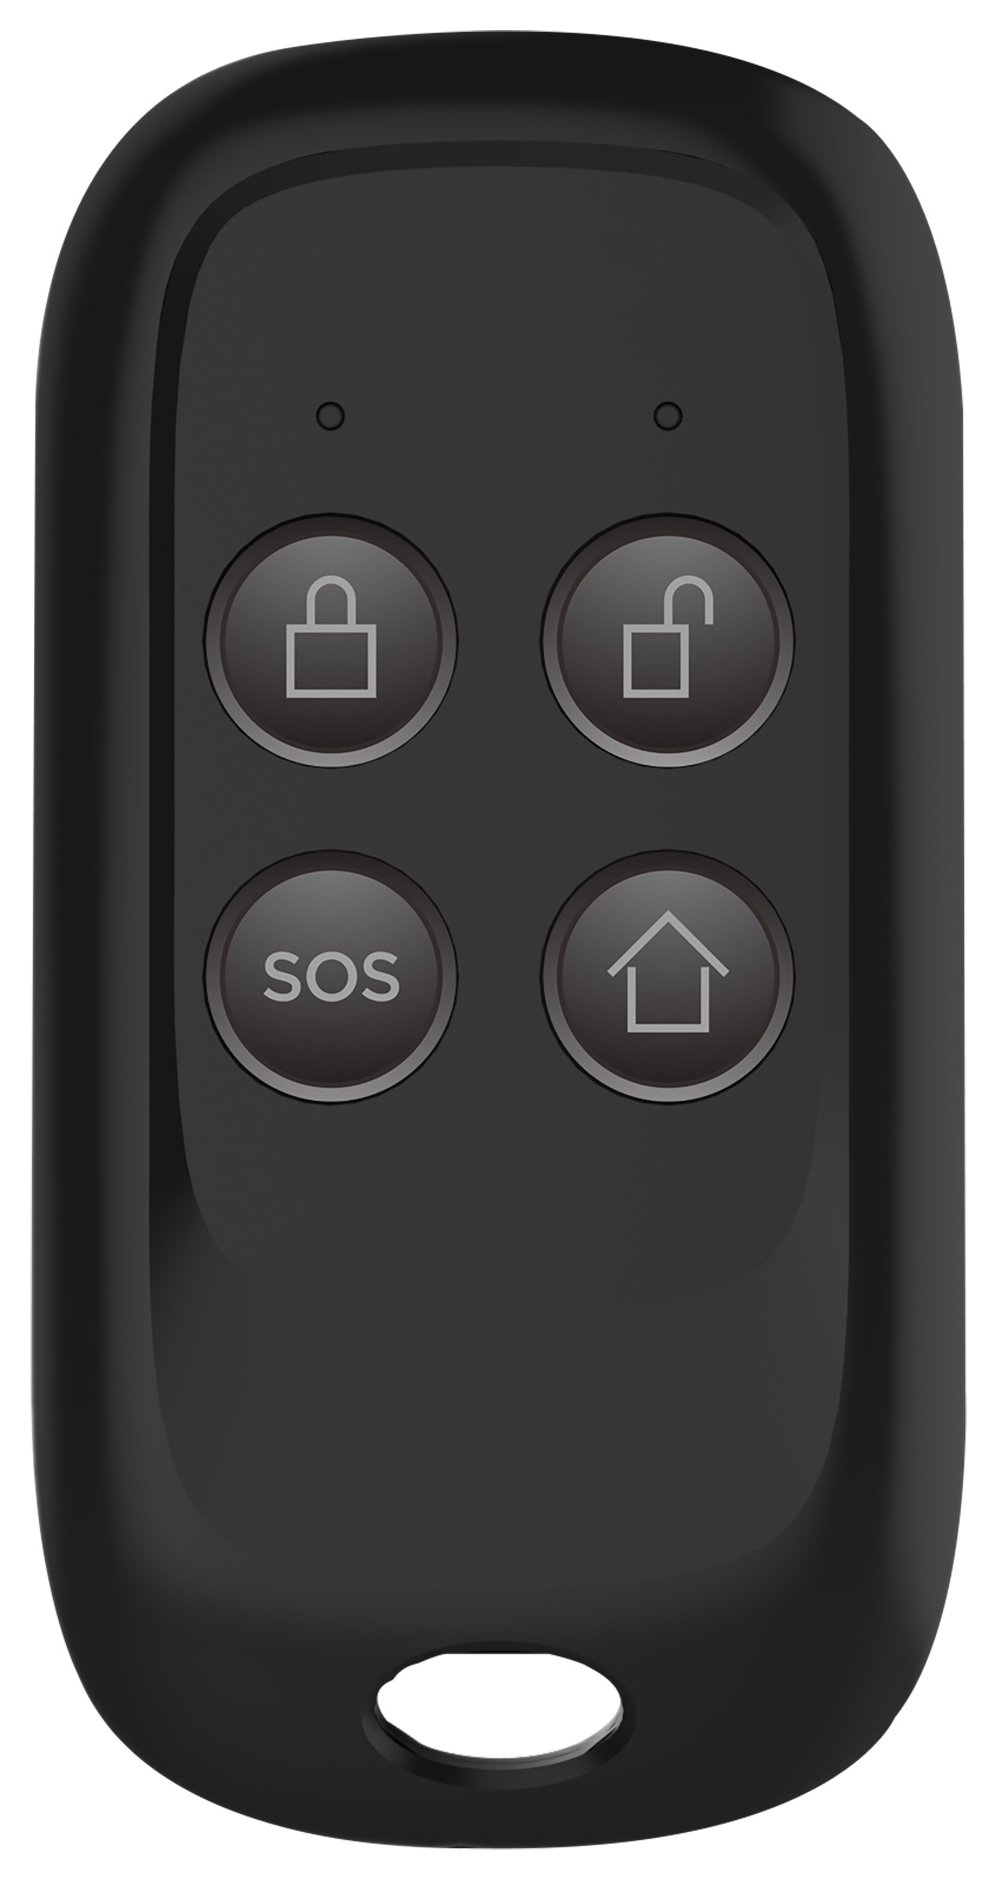 Two Alarm Remote Controls. Review